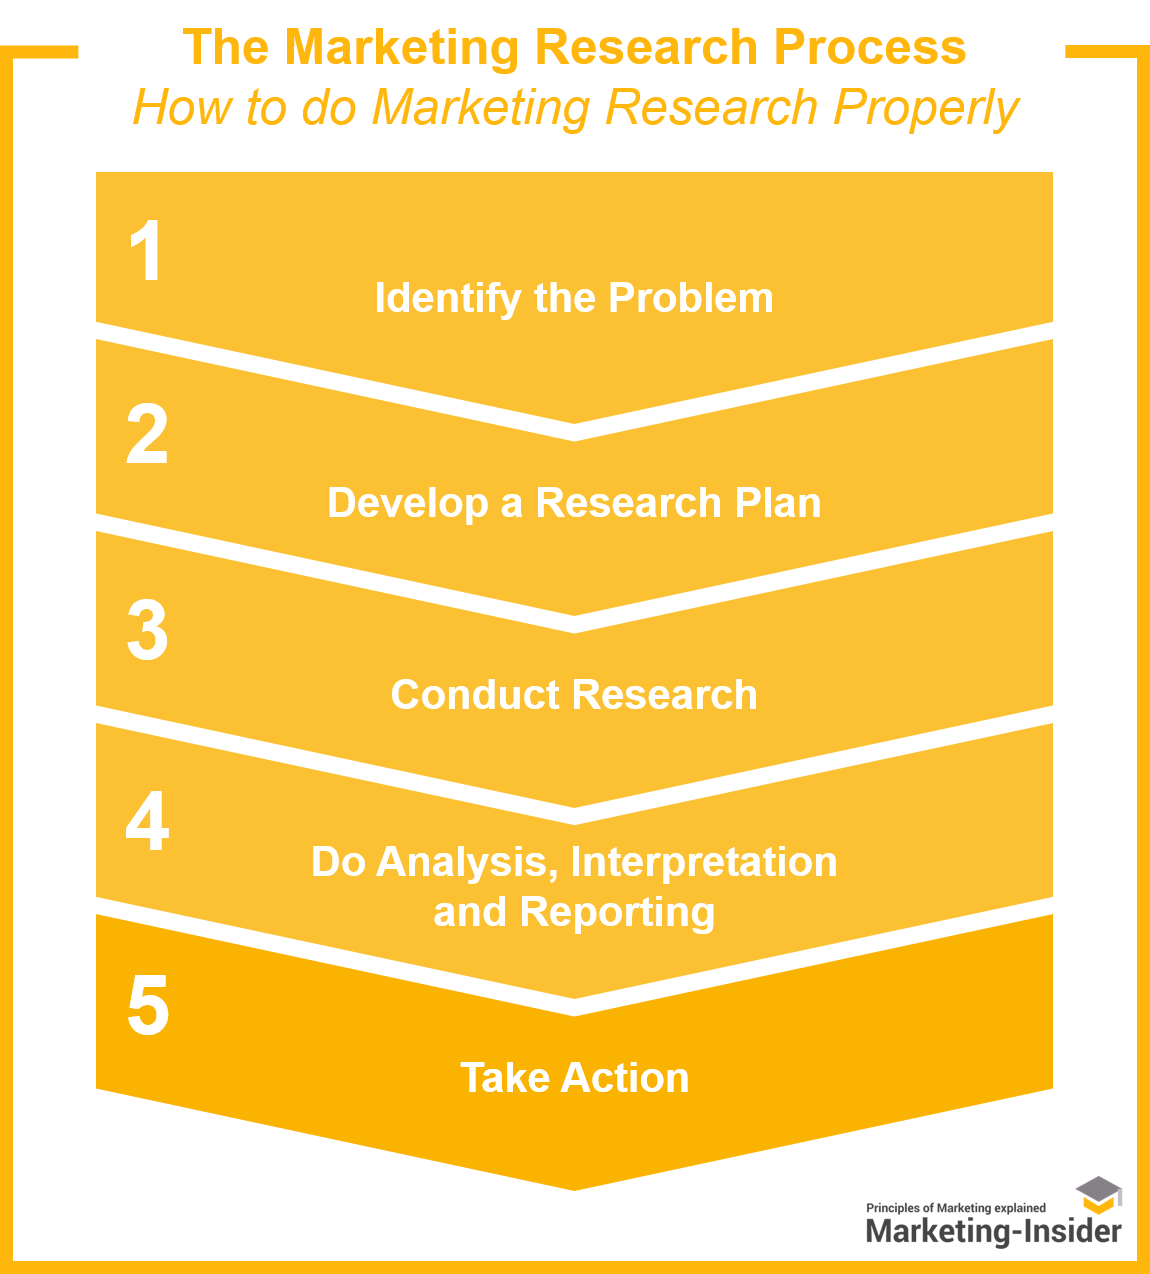 defining the problem the most important step in marketing research